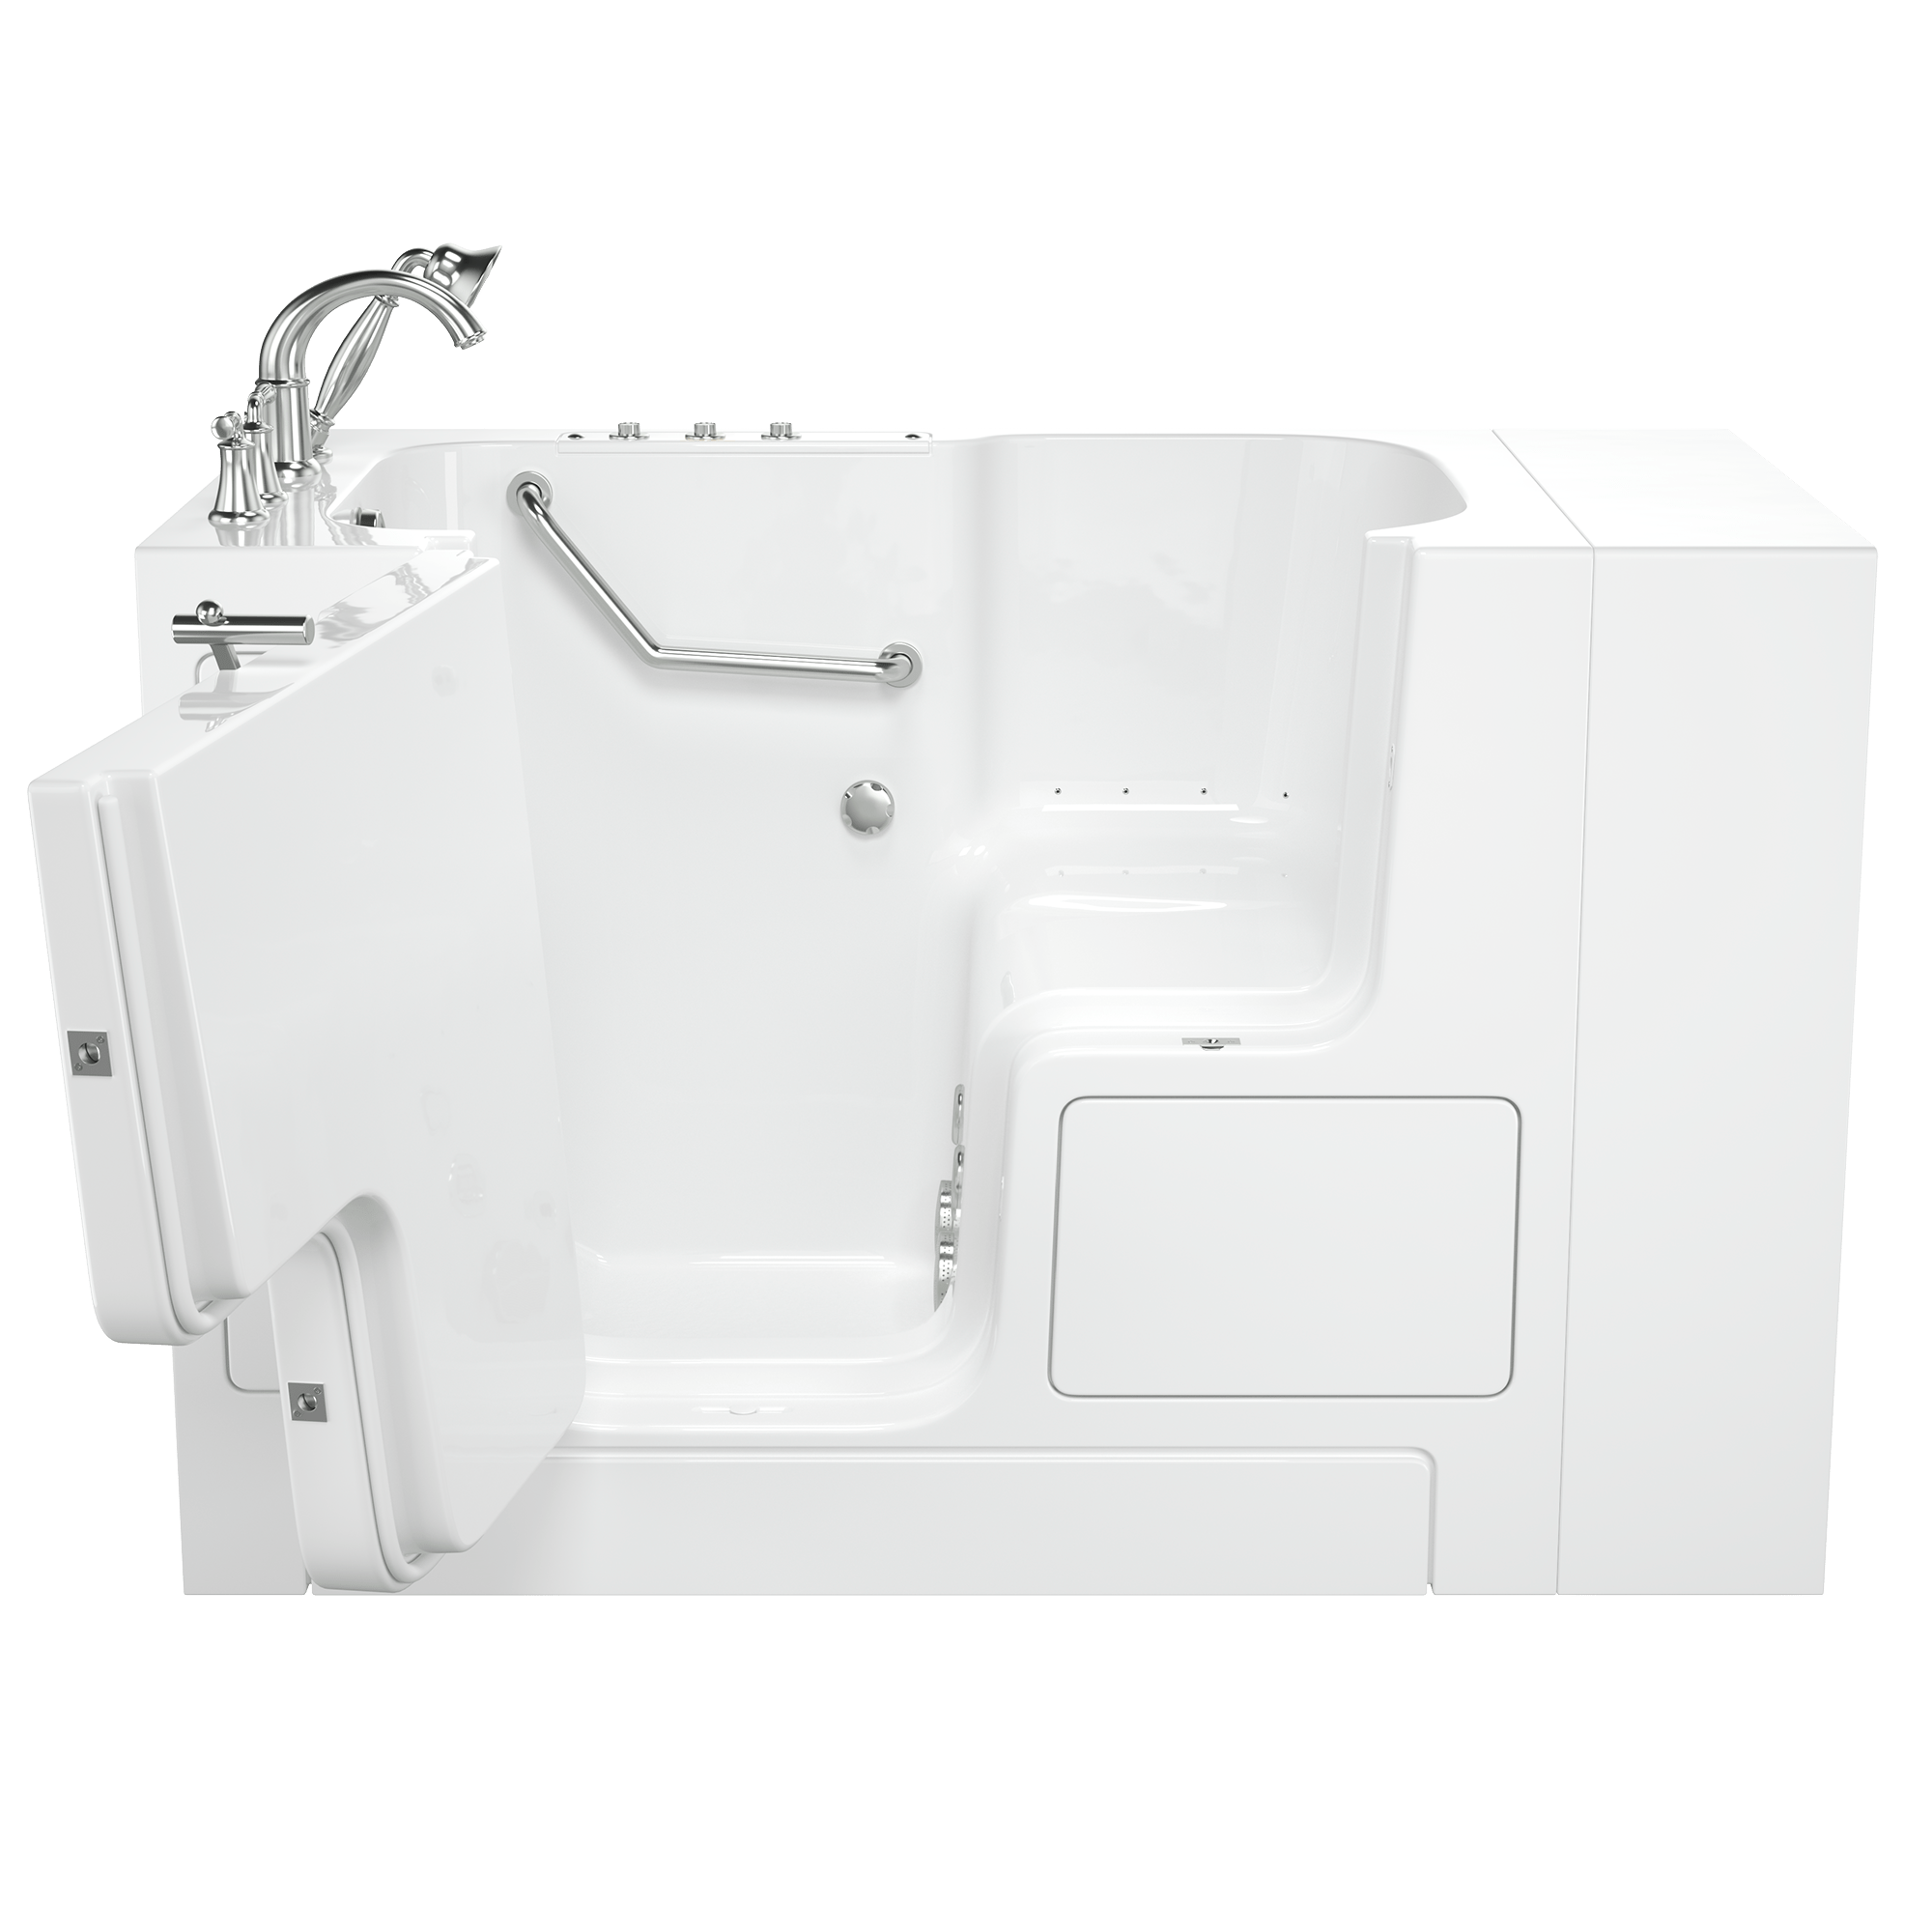 Gelcoat Value Series 32 x 52  Inch Walk in Tub With Combination Air Spa and Whirlpool Systems   Left Hand Drain With Faucet WIB WHITE